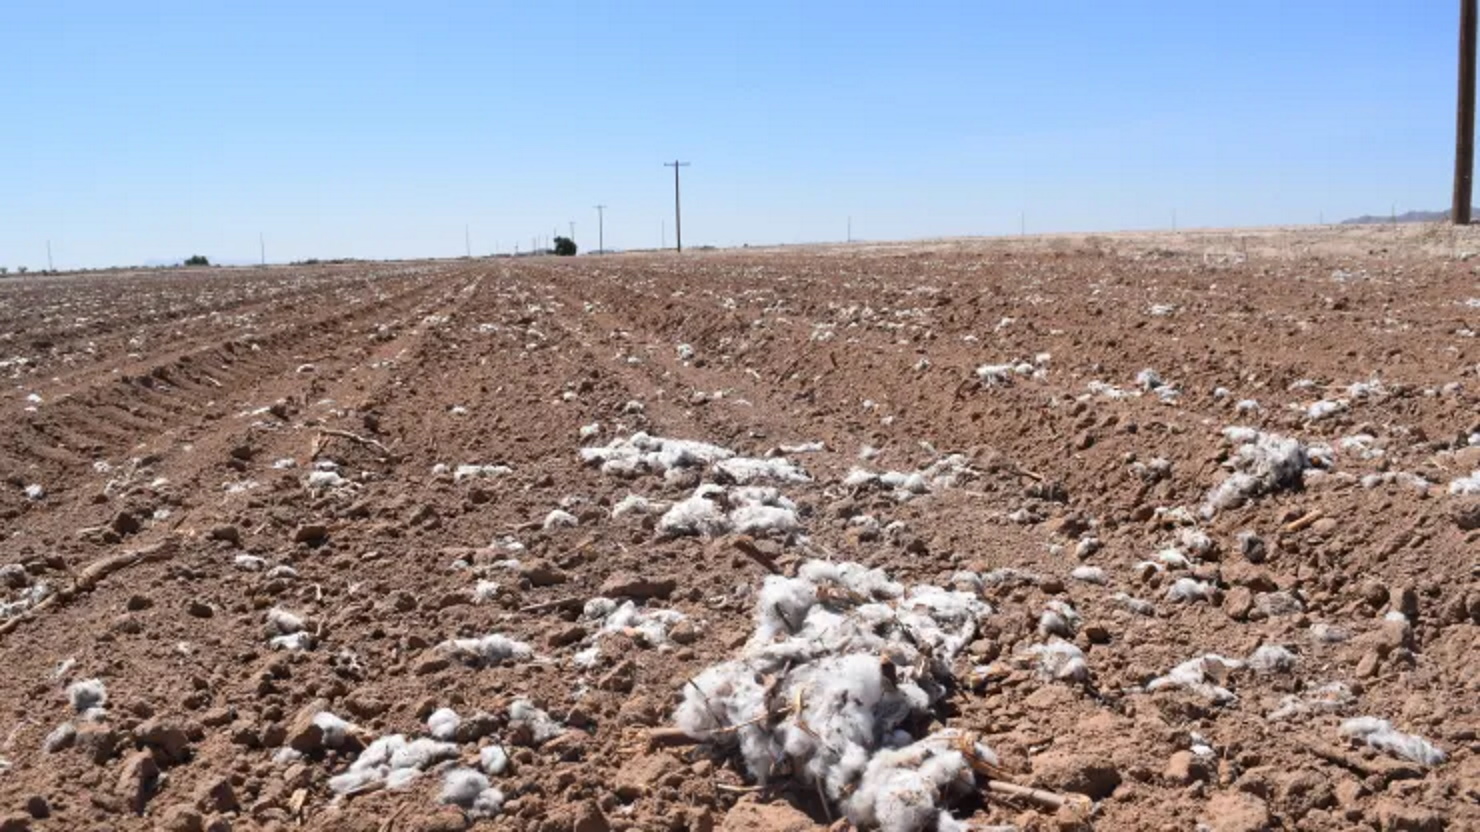 Dead cotton fields span for miles in Pinal County, Arizona in April 2022, as farmers reckon with mandatory water cuts. Photo: Emma Newburger / CNBC